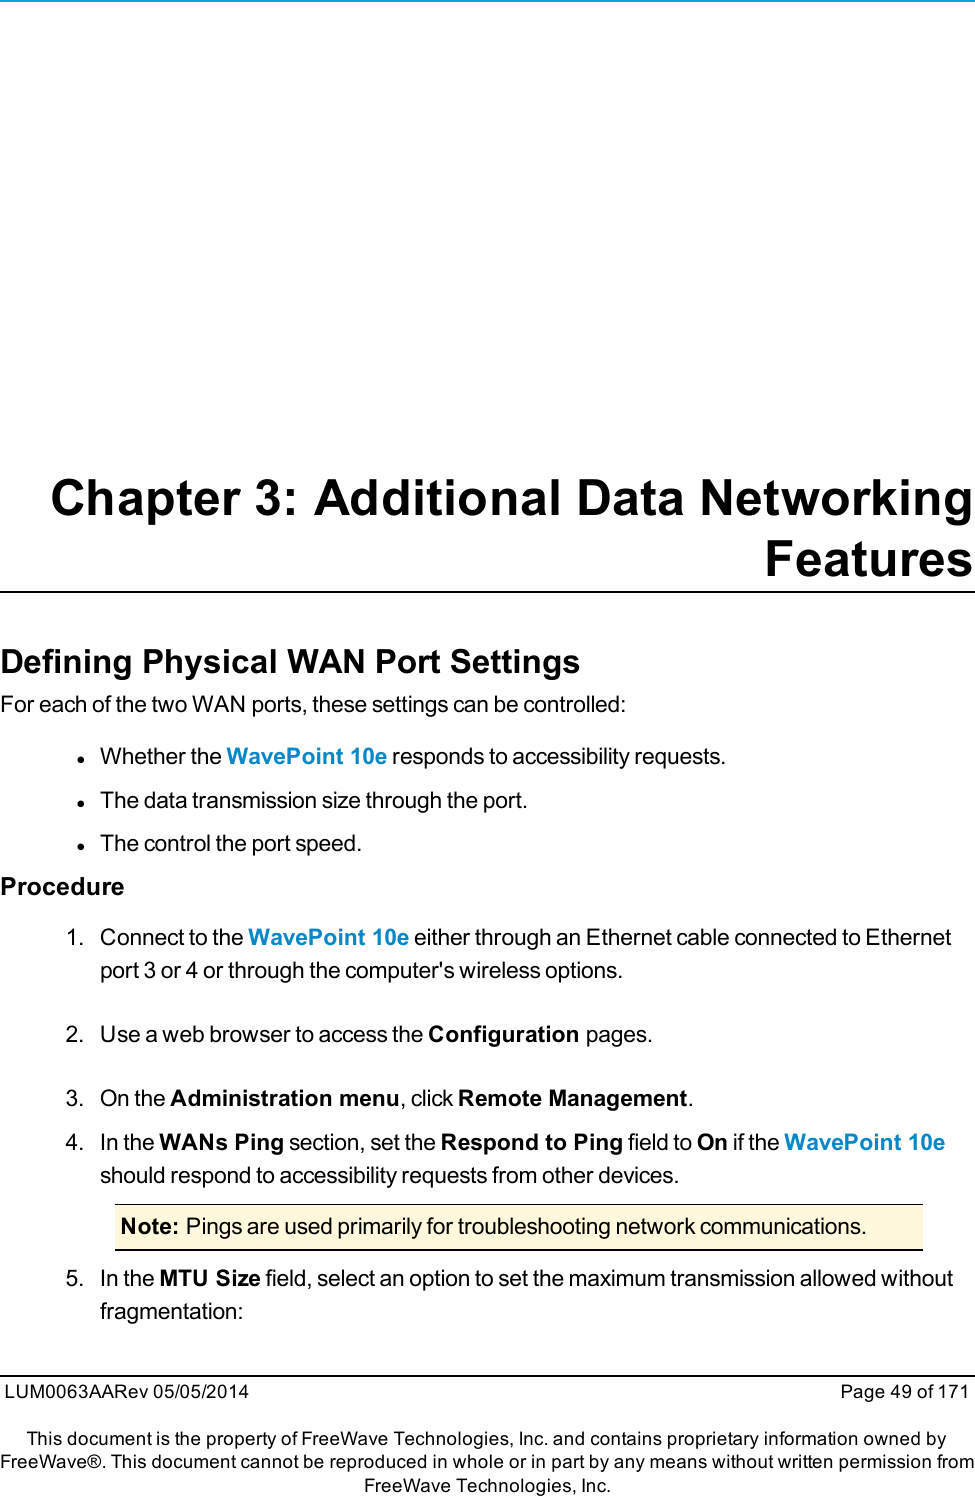 Chapter 3: Additional Data NetworkingFeaturesDefining Physical WAN Port SettingsFor each of the two WAN ports, these settings can be controlled:lWhether the WavePoint 10e responds to accessibility requests.lThe data transmission size through the port.lThe control the port speed.Procedure1. Connect to the WavePoint 10e either through an Ethernet cable connected to Ethernetport 3 or 4 or through the computer&apos;s wireless options.2. Use a web browser to access the Configuration pages.3. On the Administration menu, click Remote Management.4. In the WANs Ping section, set the Respond to Ping field to On if the WavePoint 10eshould respond to accessibility requests from other devices.Note: Pings are used primarily for troubleshooting network communications.5. In the MTU Size field, select an option to set the maximum transmission allowed withoutfragmentation:LUM0063AARev 05/05/2014 Page 49 of 171This document is the property of FreeWave Technologies, Inc. and contains proprietary information owned byFreeWave®. This document cannot be reproduced in whole or in part by any means without written permission fromFreeWave Technologies, Inc.